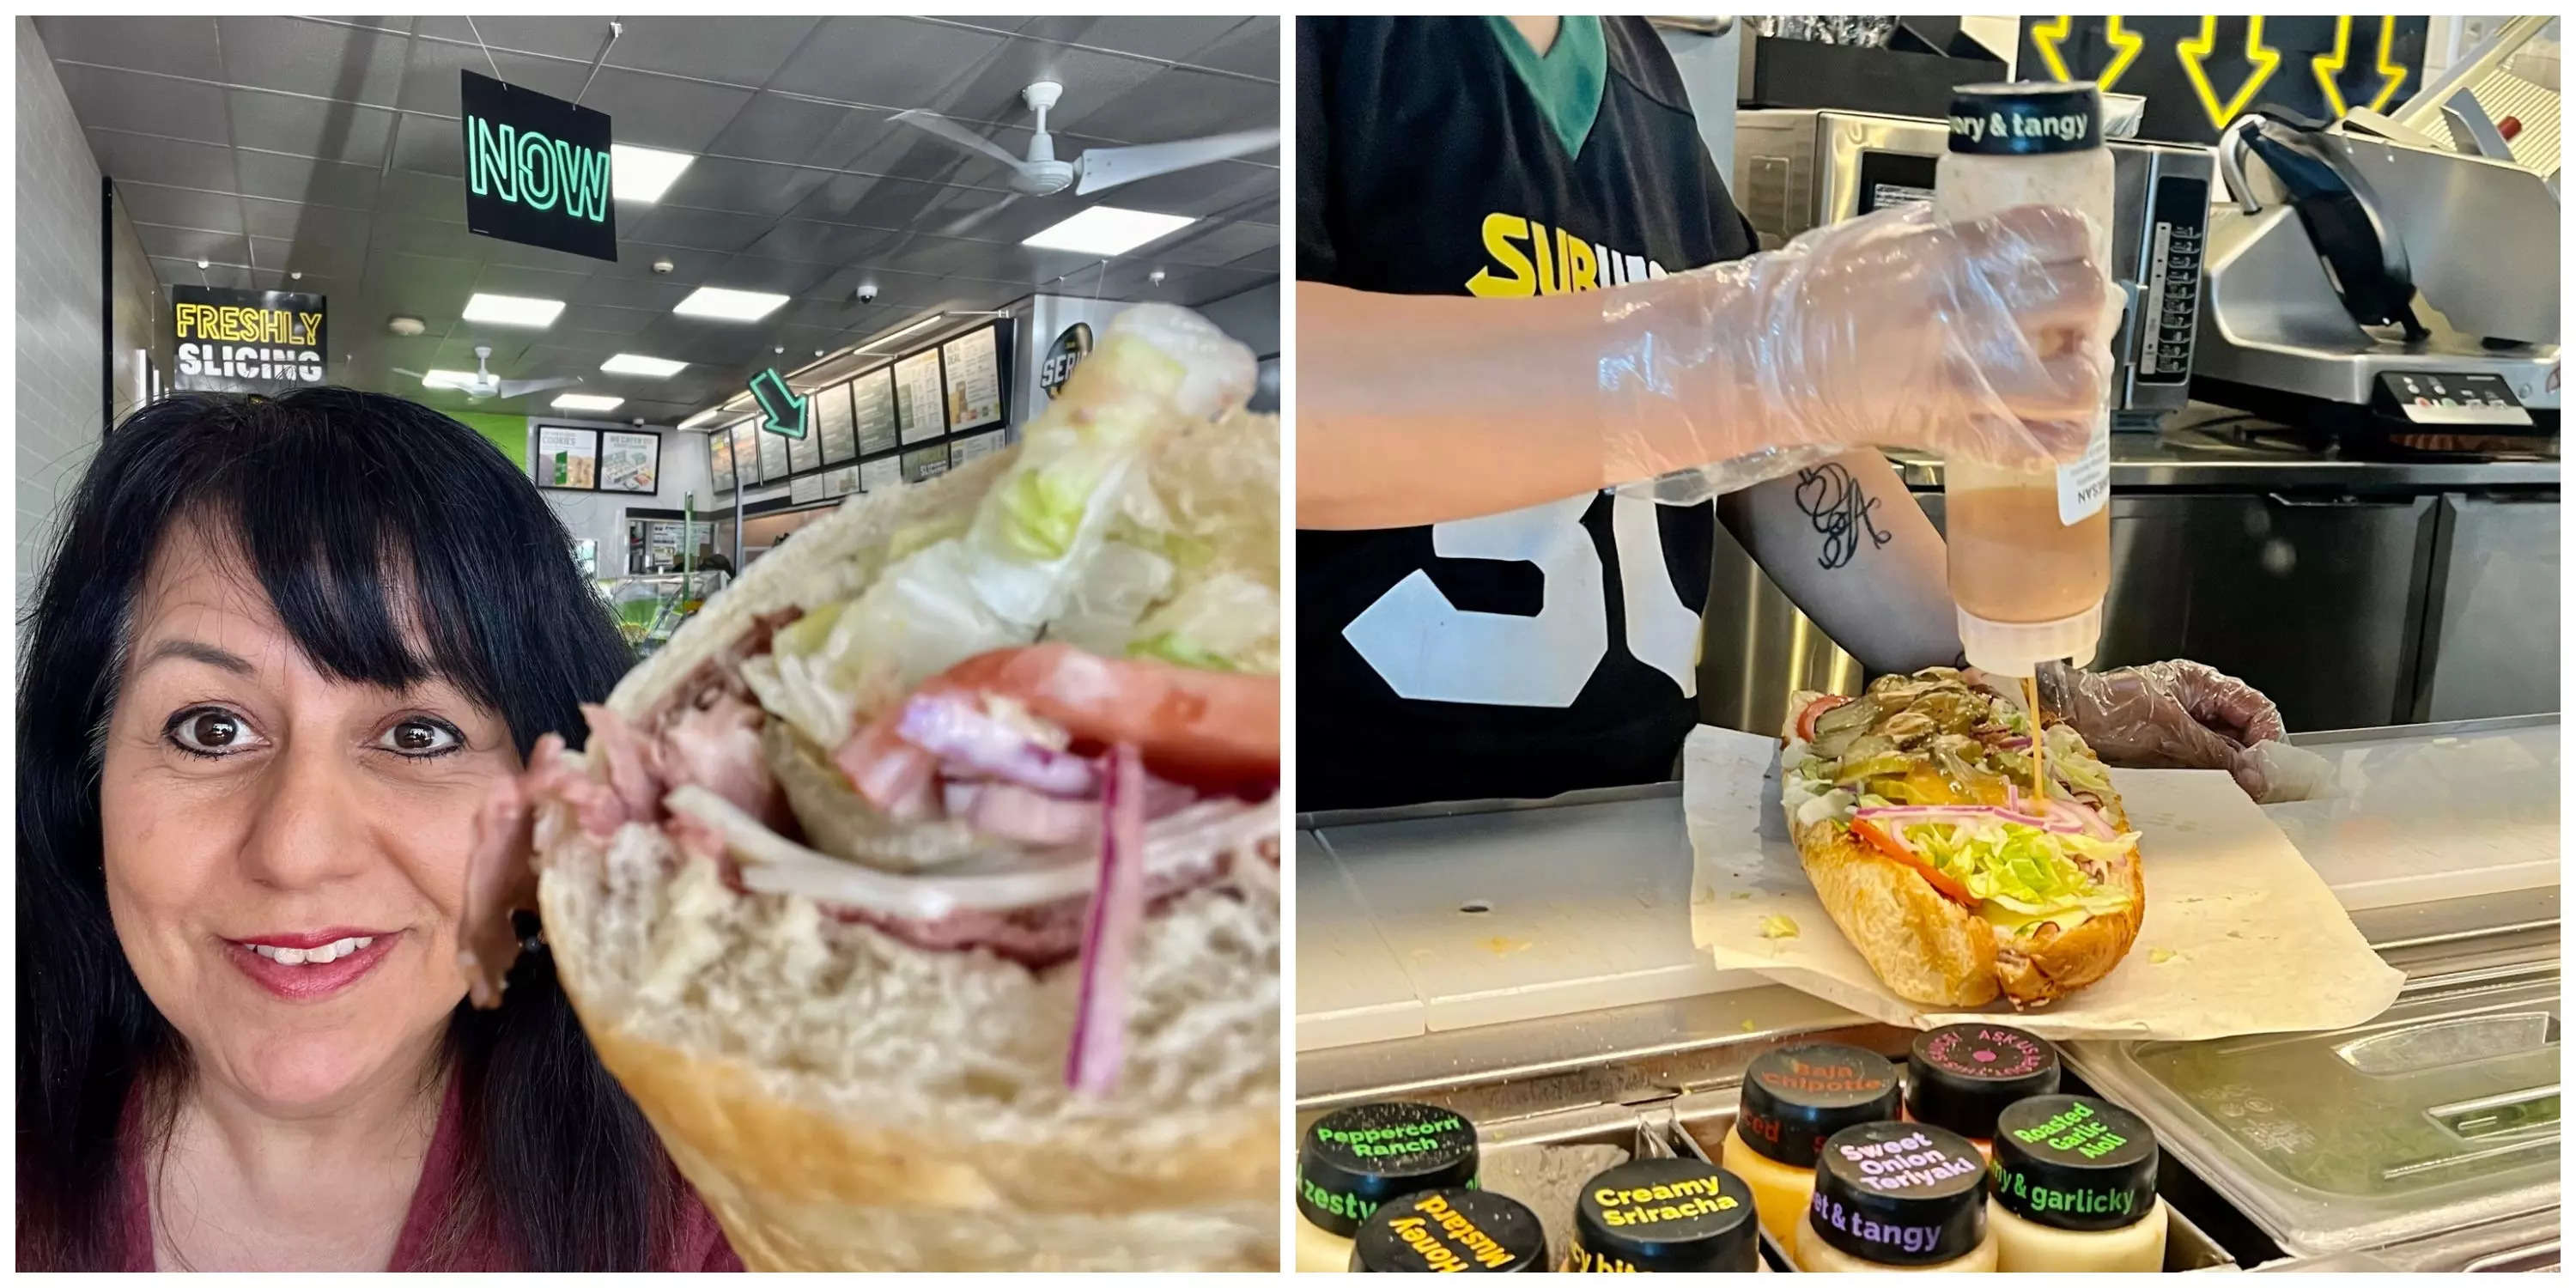 https://www.businessinsider.in/photo/103292627/i-visited-4-subway-locations-and-saw-firsthand-what-challenges-its-new-owners-will-face-i-found-stale-bread-bad-tuna-and-outdated-dirty-restaurants-.jpg?imgsize=271760